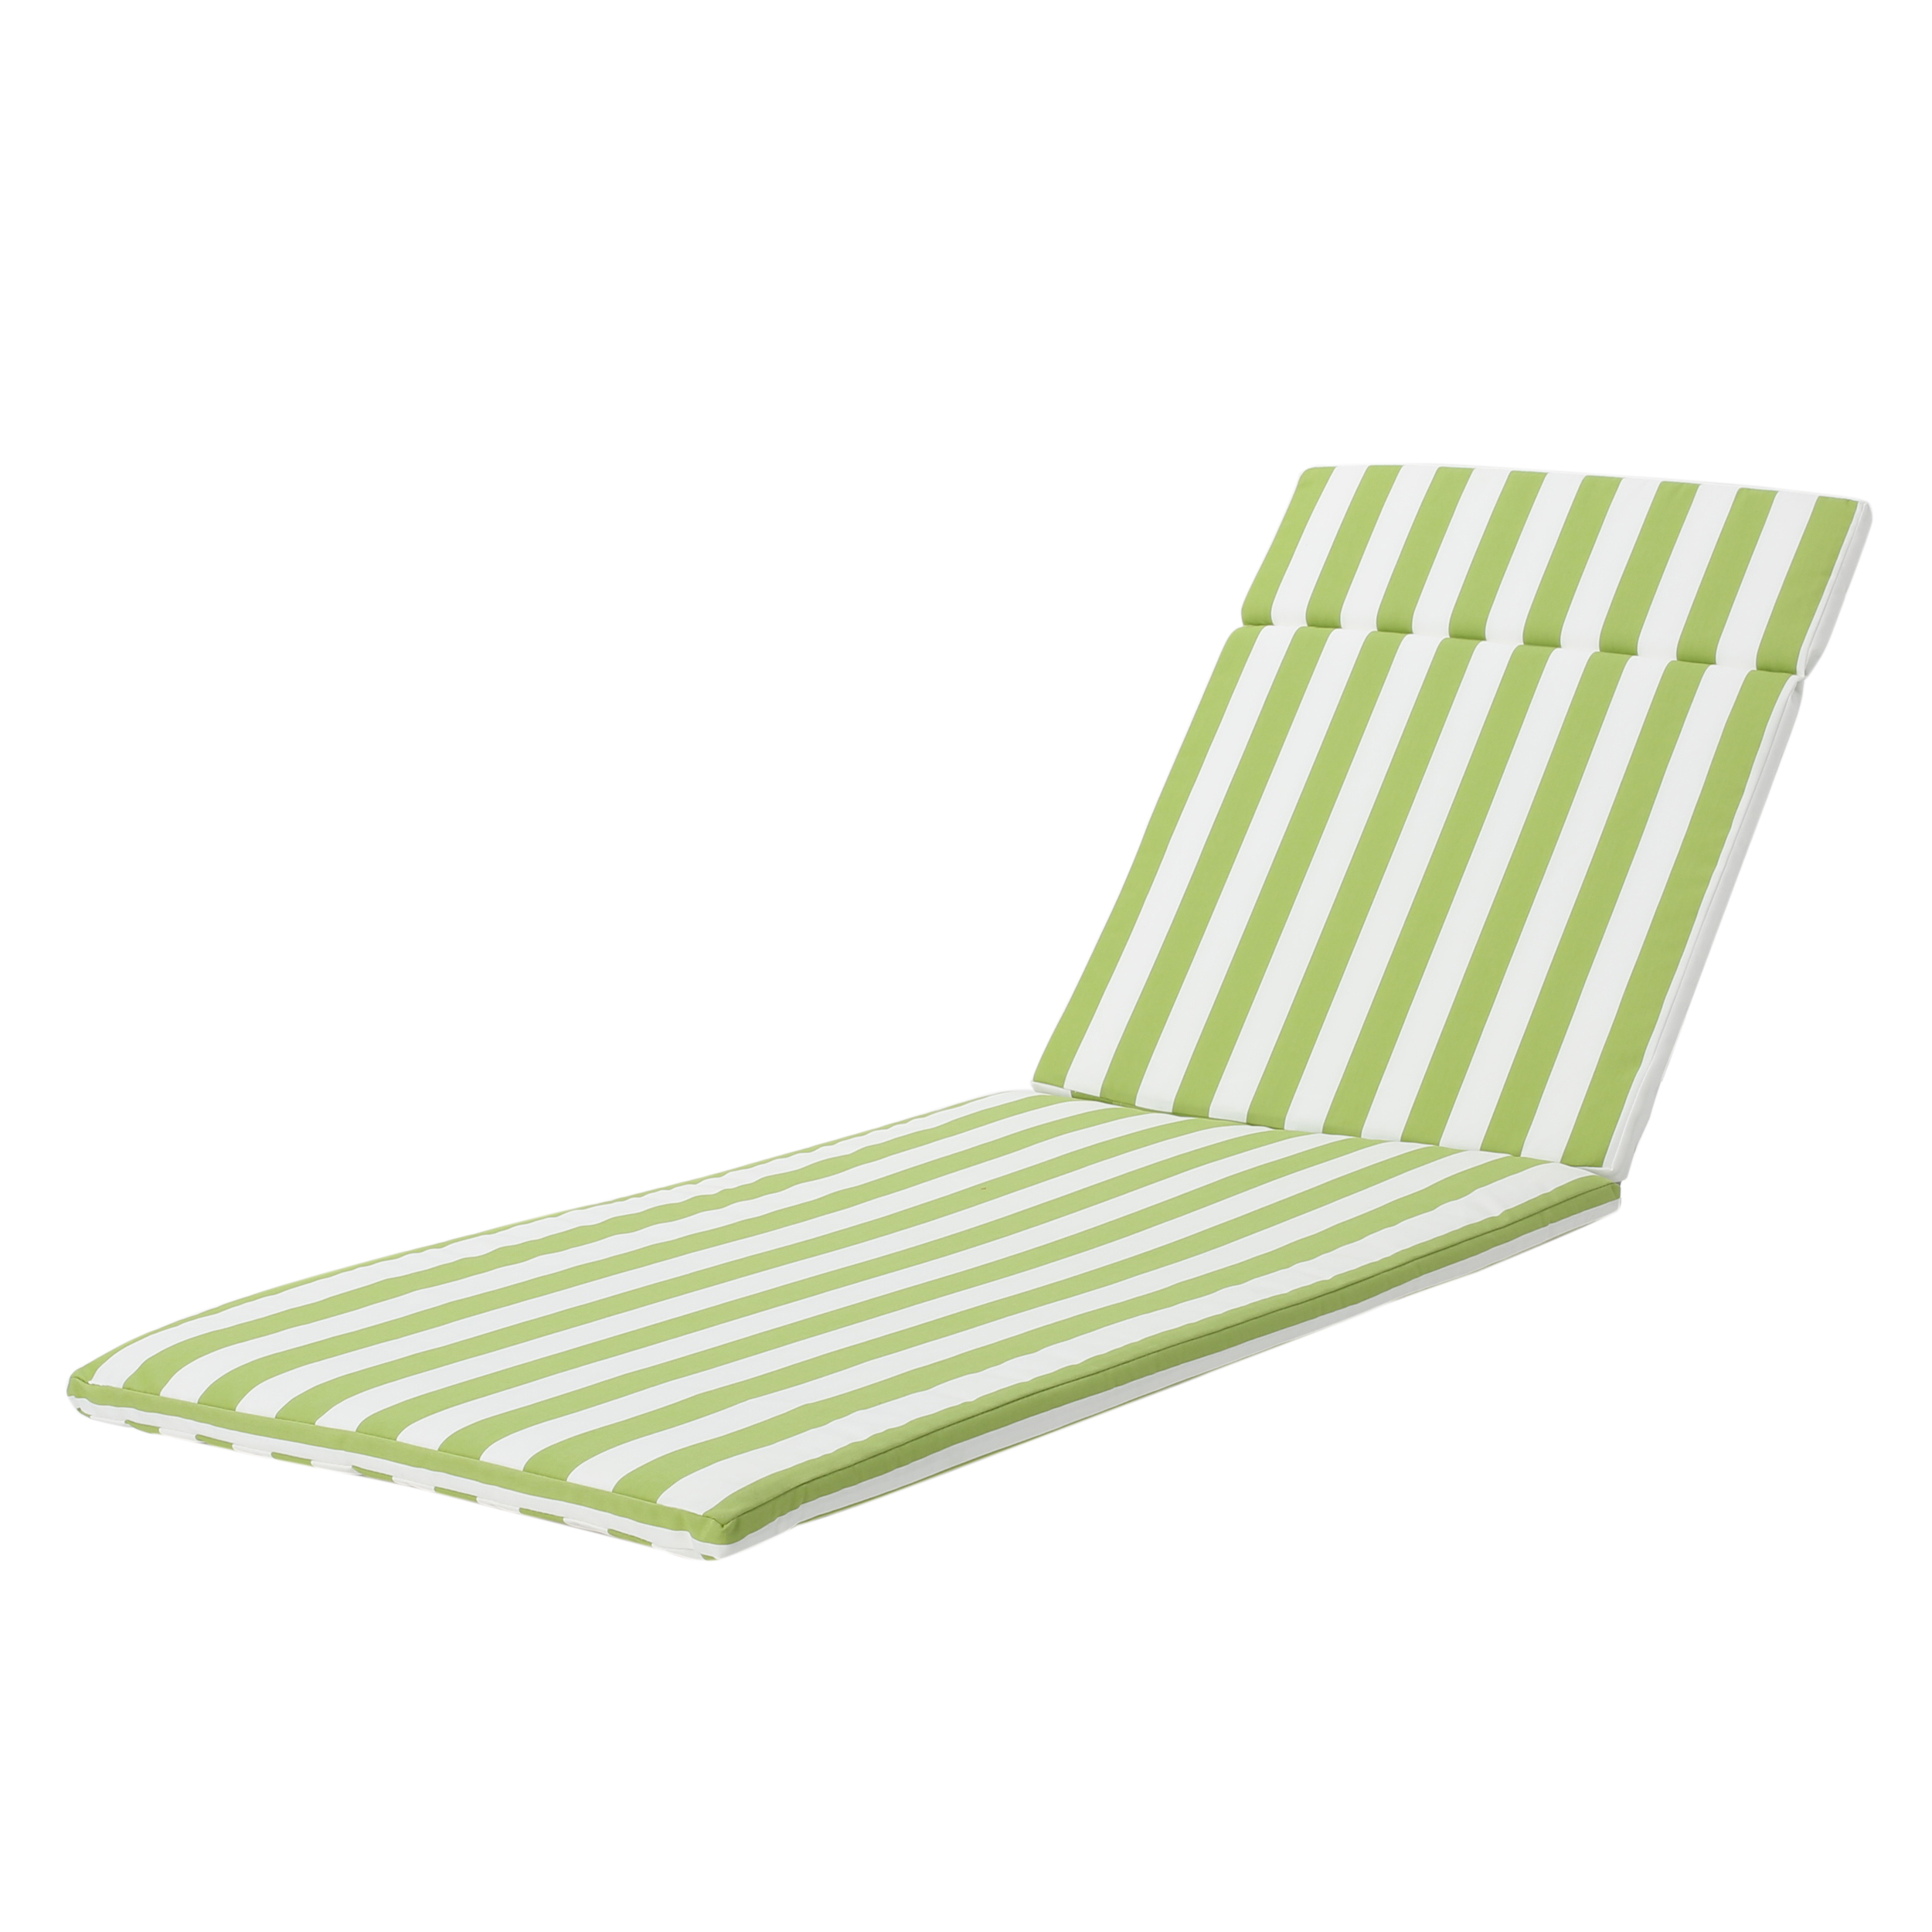 Anthony Outdoor Water Resistant Chaise Lounge Cushion, Green and White Stripe - image 3 of 6